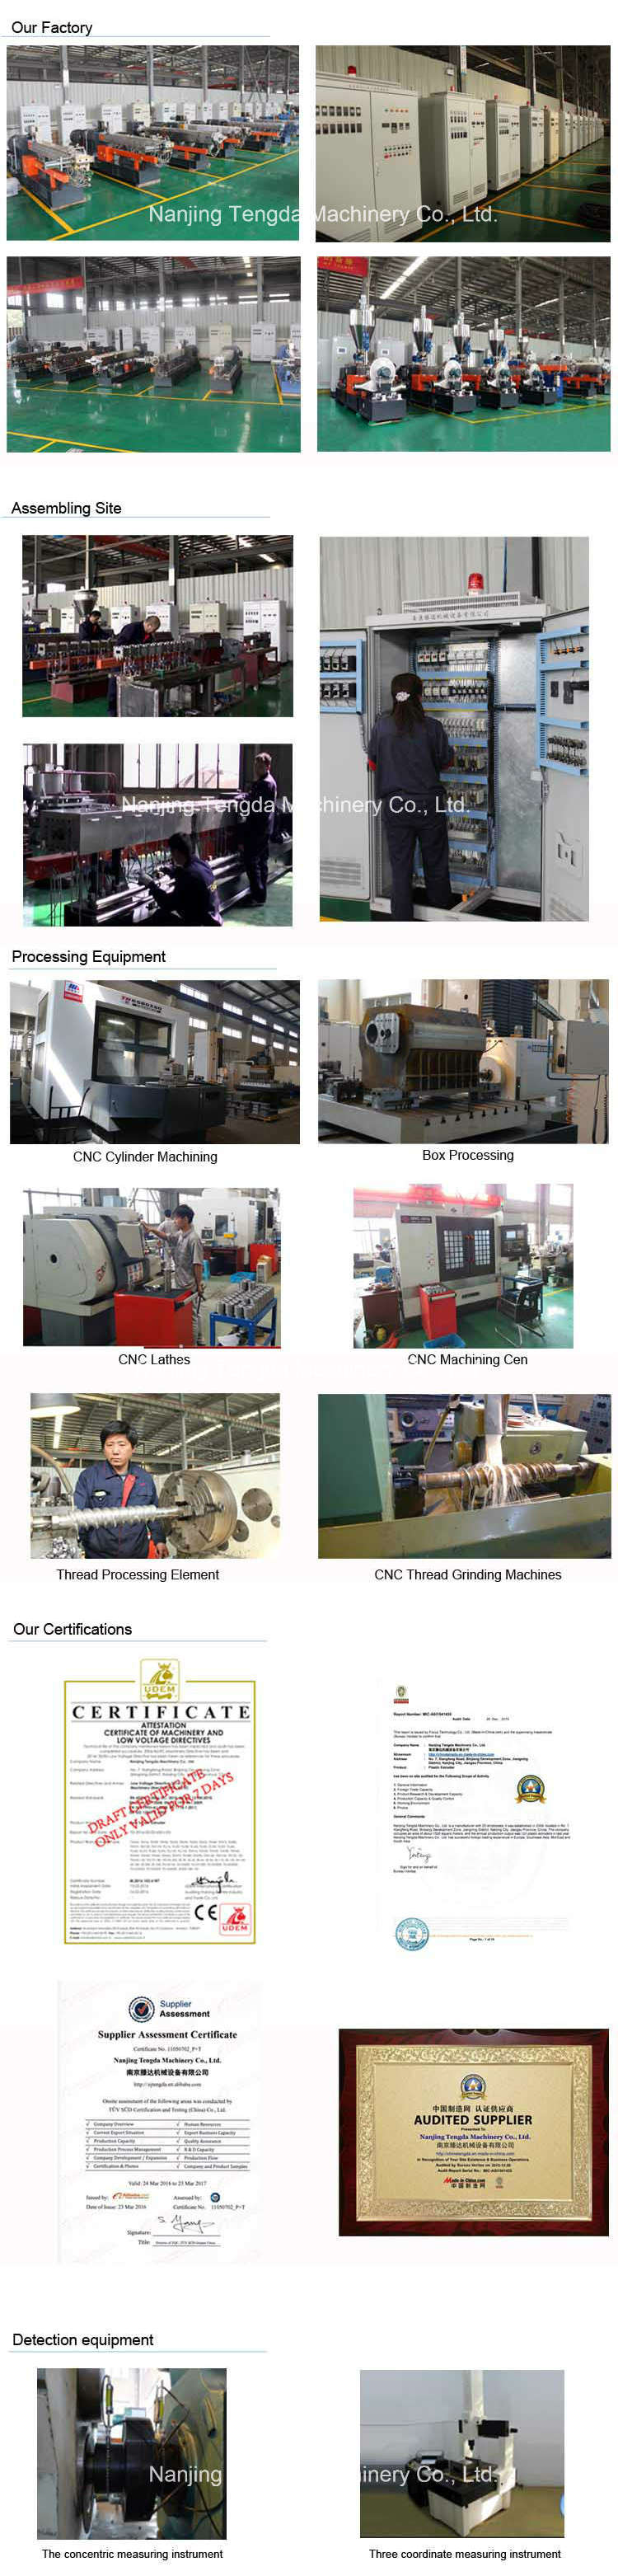 PP/PE/ABS Single Screw Extruder with Ce Certificated